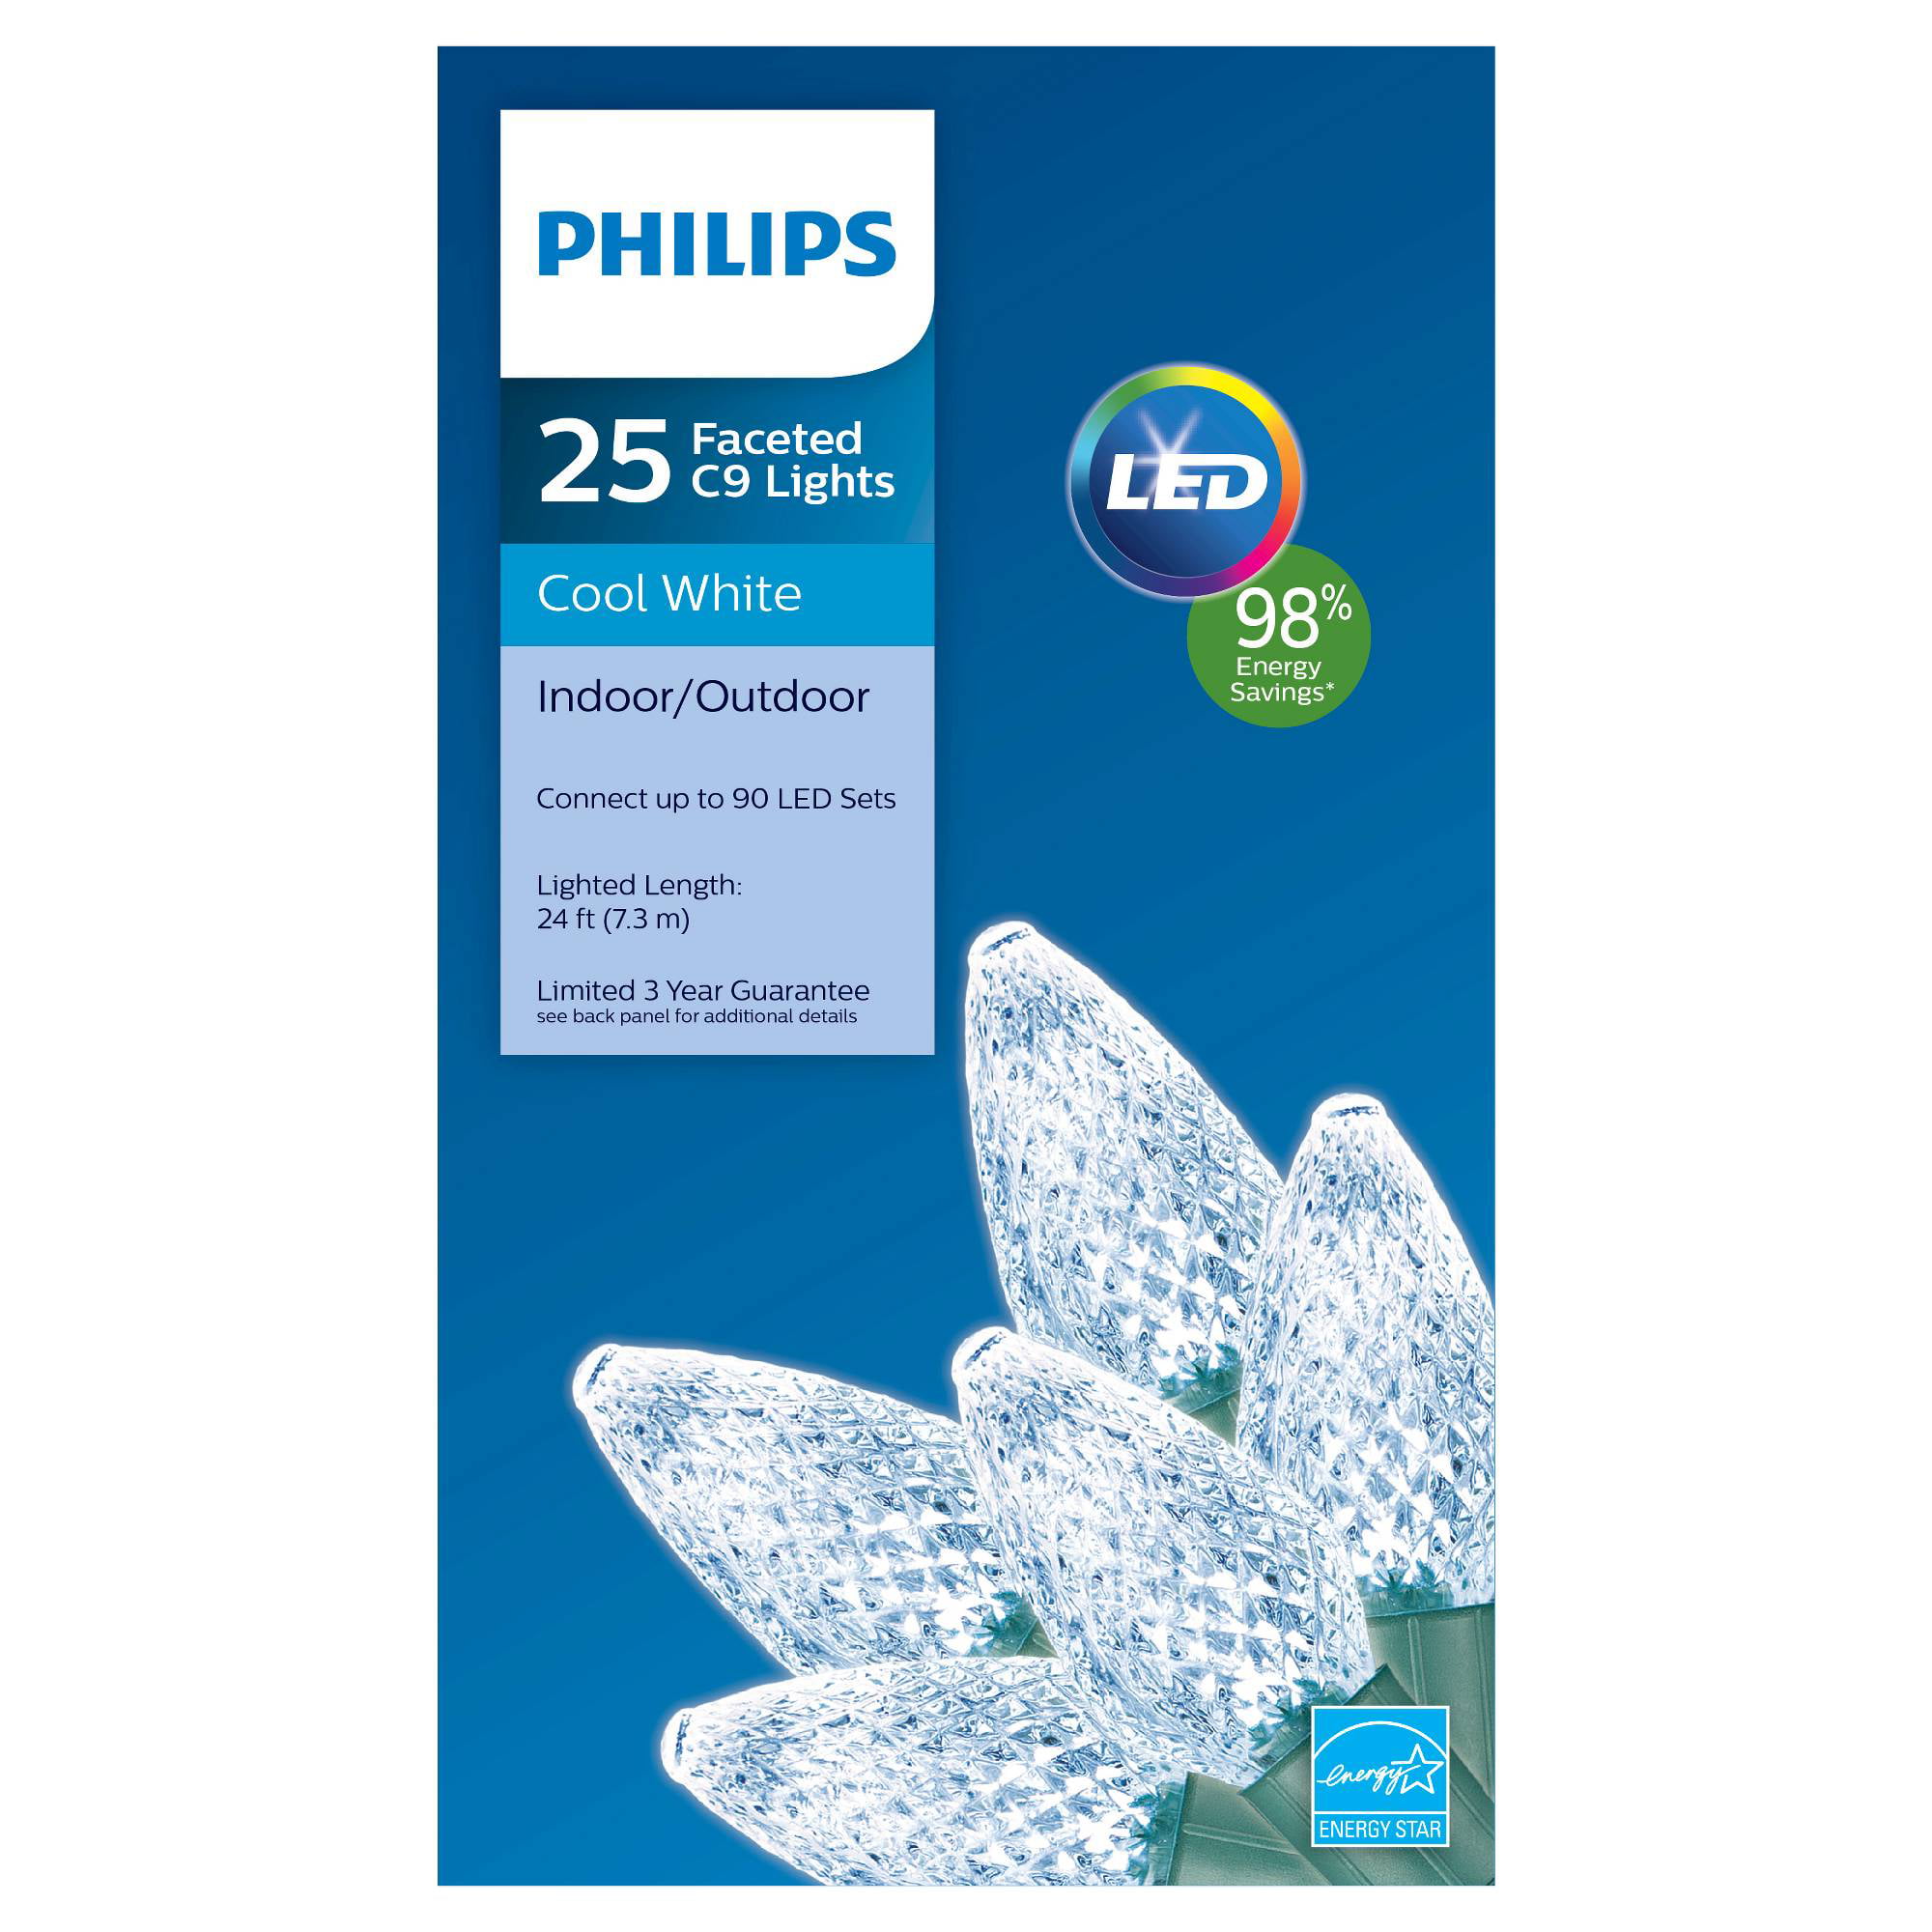 PHILIPS 25 ct Christmas LED C9 Faceted String Lights Cool White 